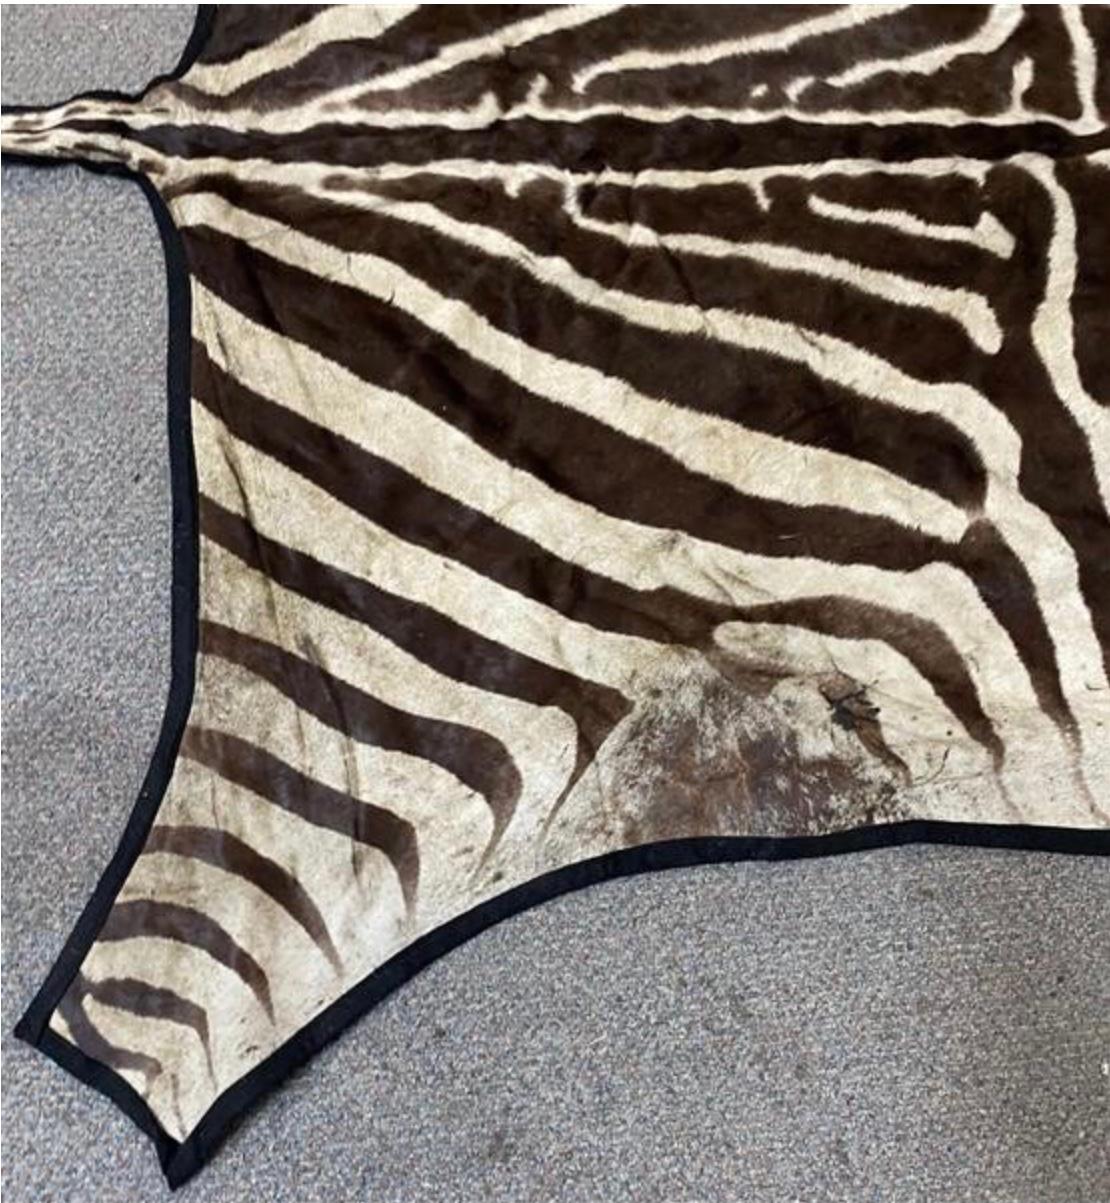 Beautiful real zebra hide rug. In vintage used condition. Great for any home. Awesome detail. A compliment to many rooms adding texture and sophistication in a Ralph Lauren safari inspired look.